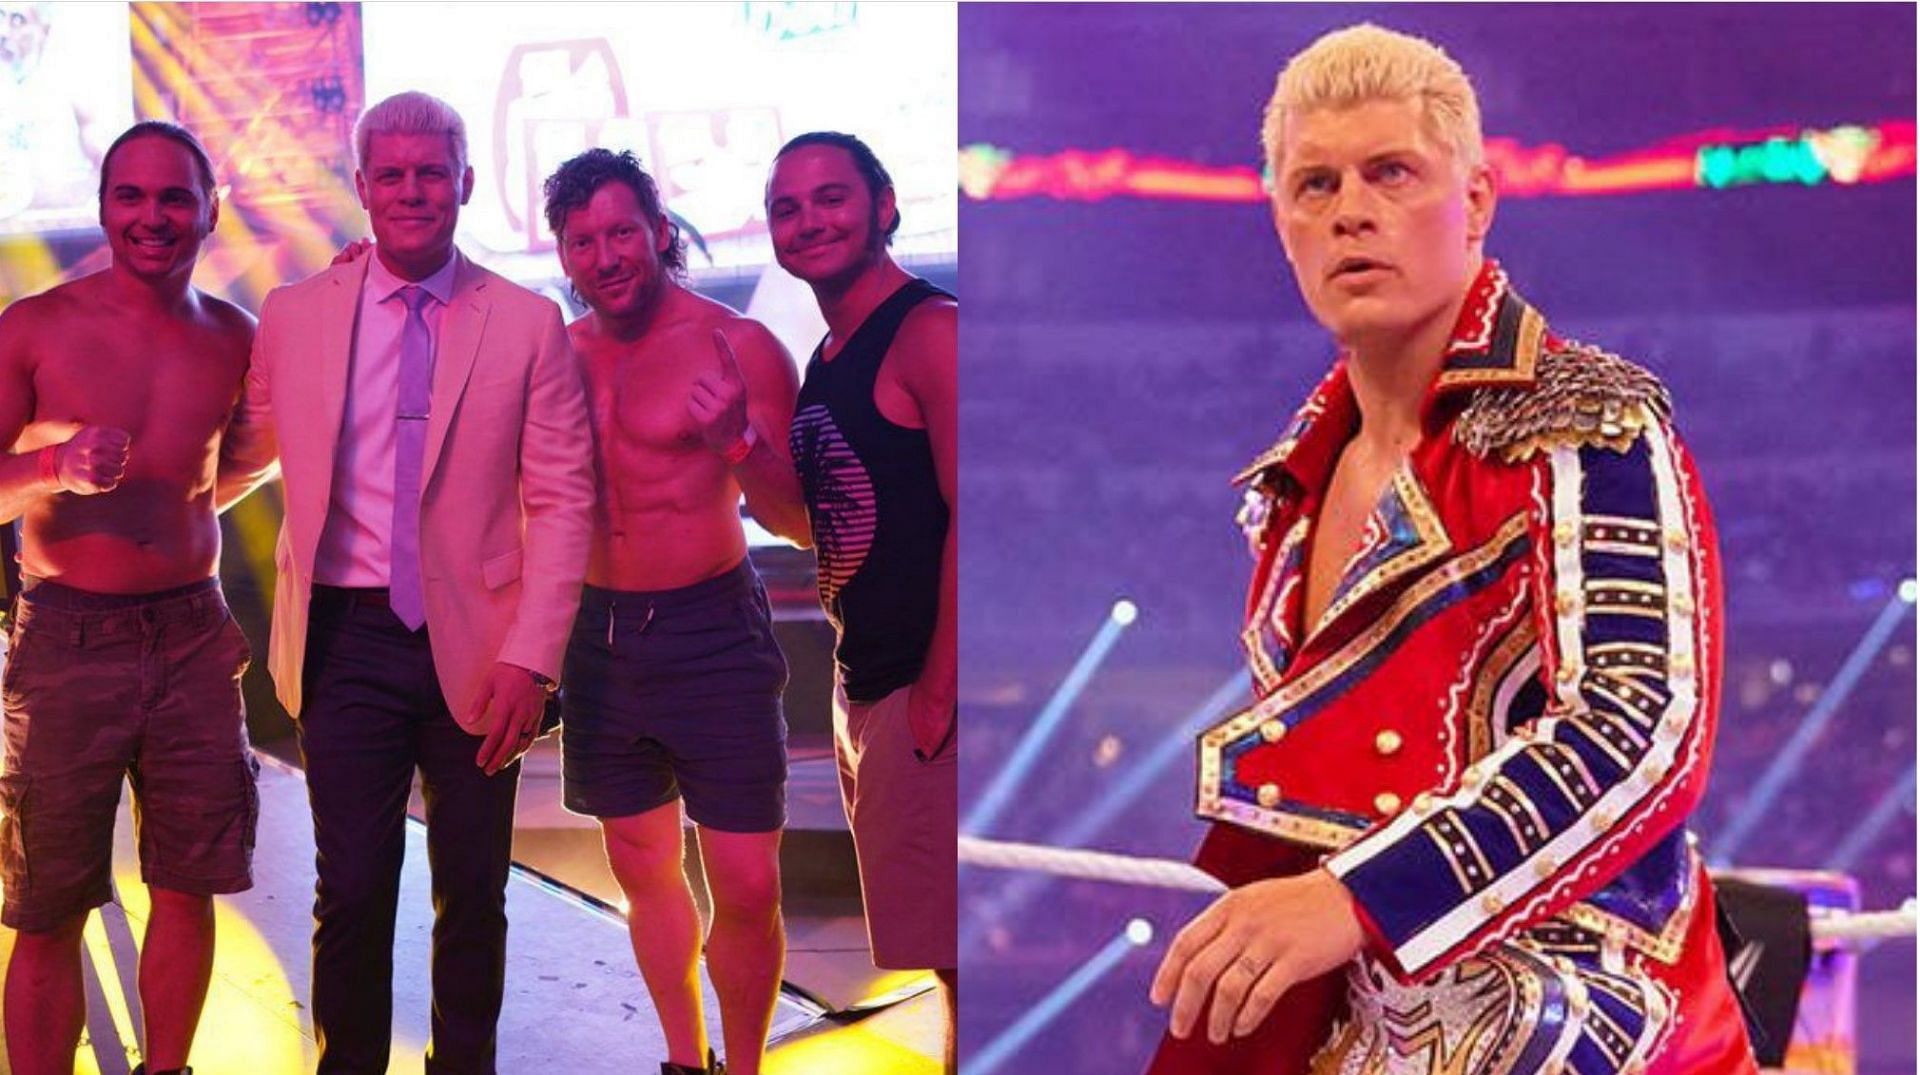 Cody Rhodes with Kenny Omega and The Young Bucks!